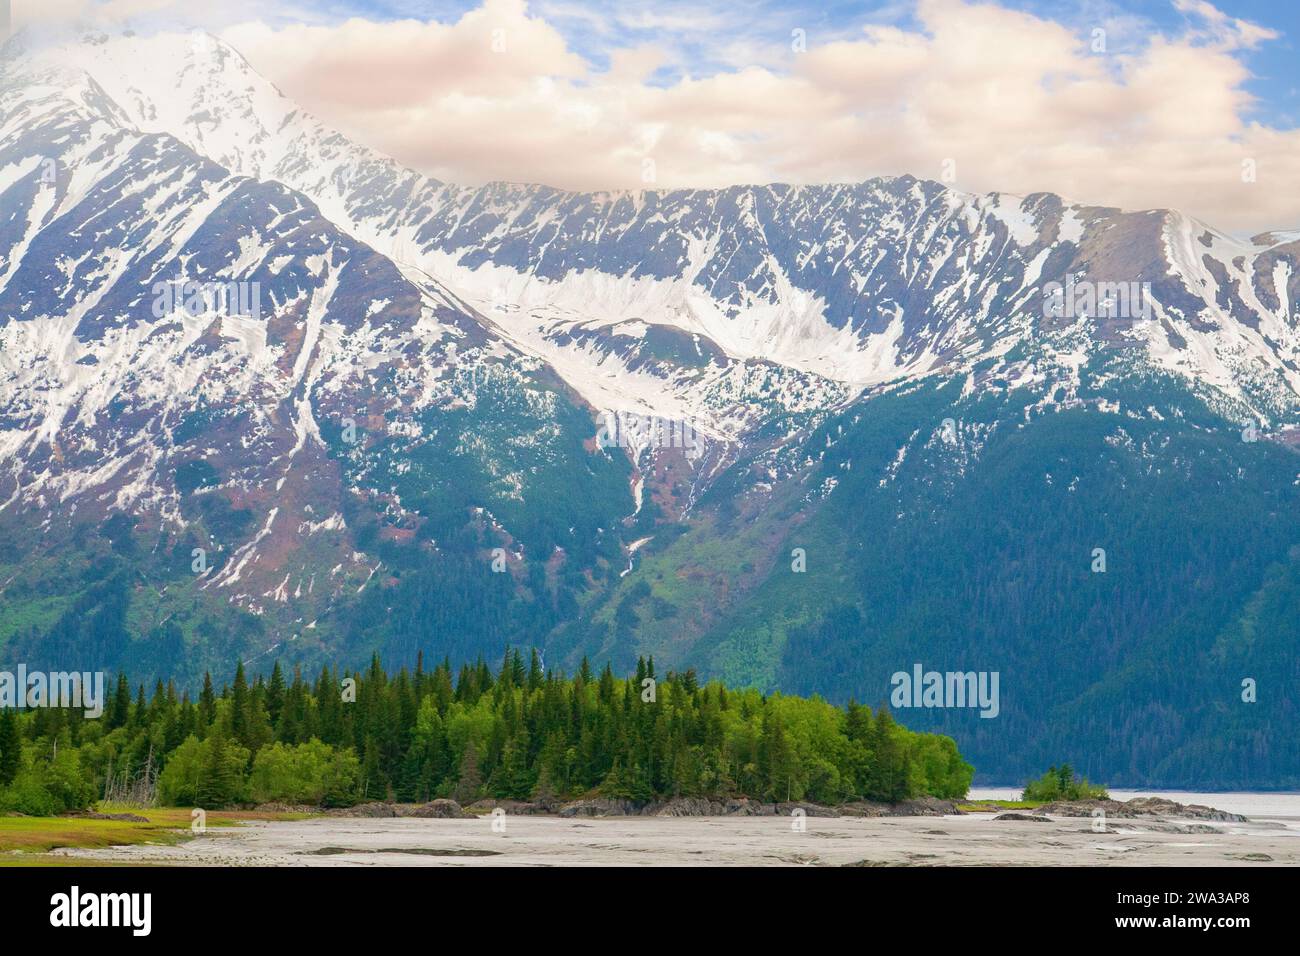 Scenic landscape of the Alaskan mountain range and waters. Stock Photo